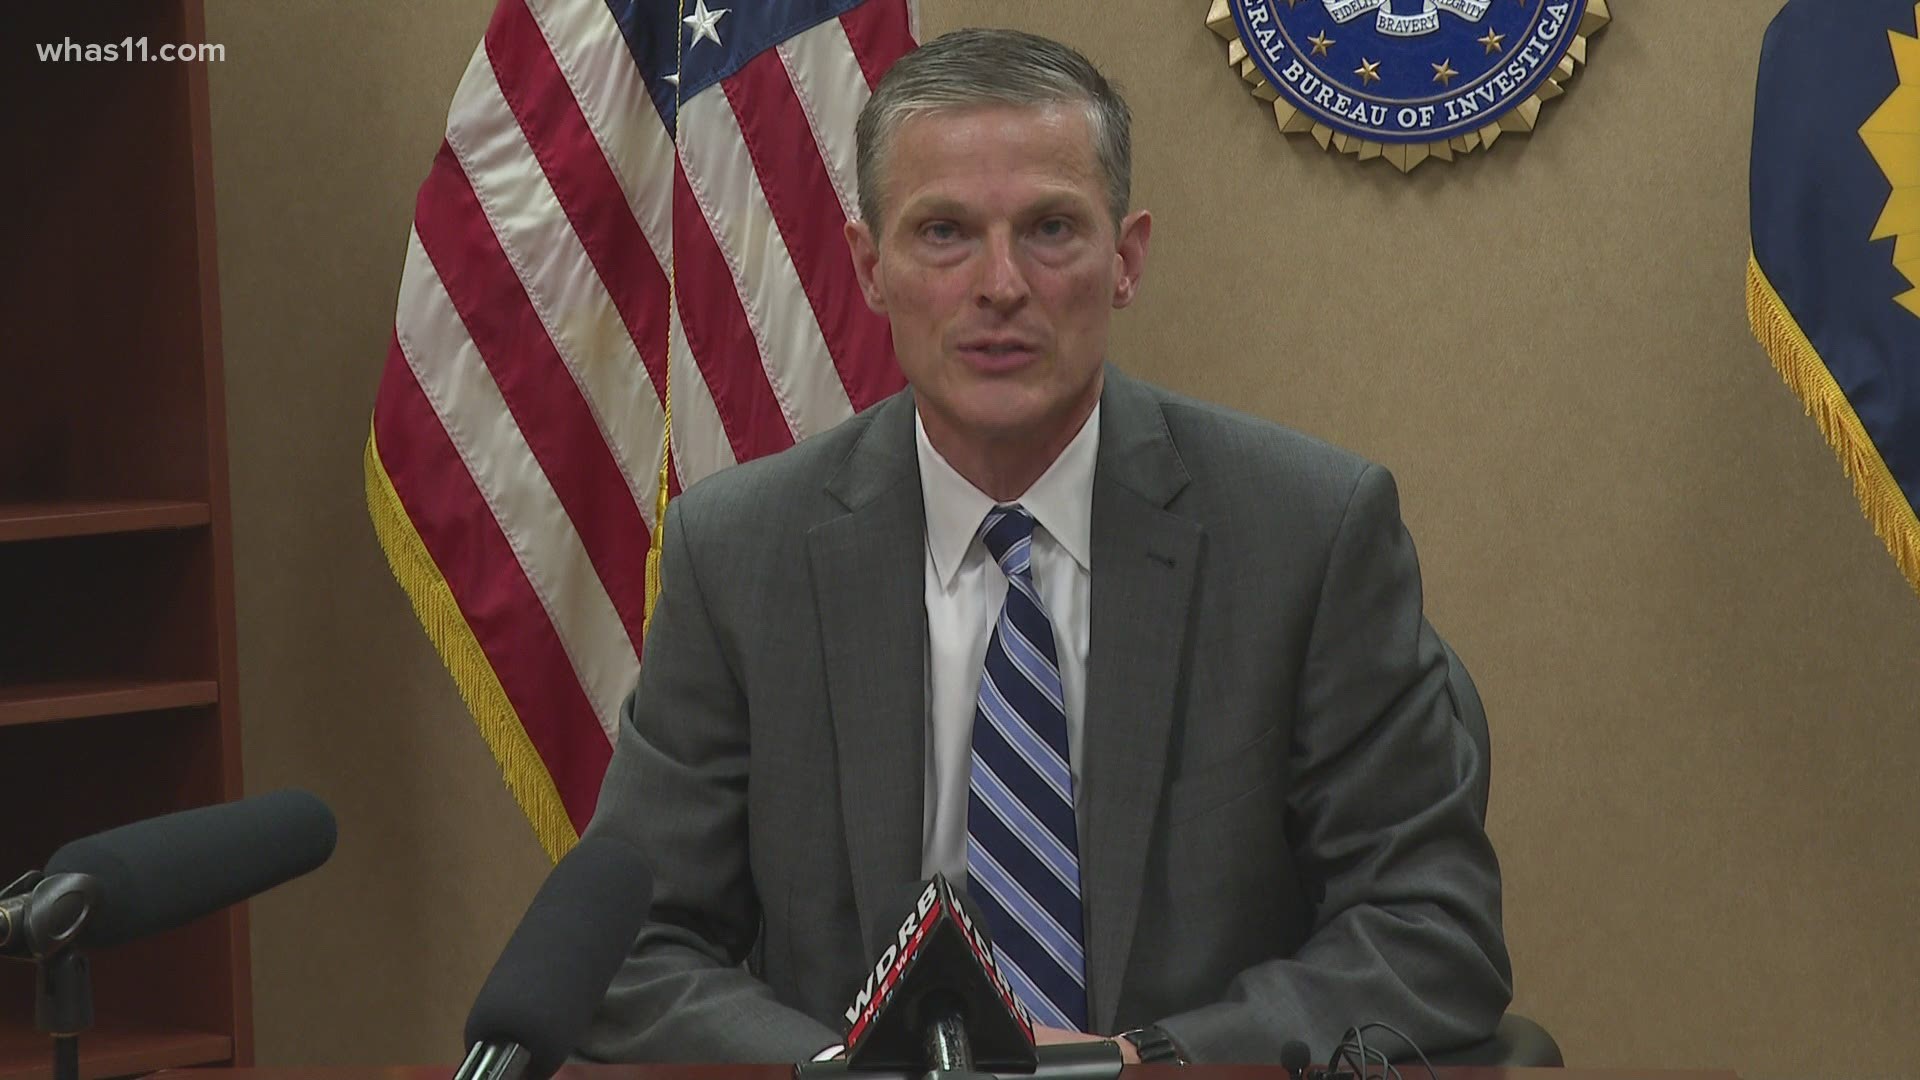 The Special Agent in Charge at Louisville FBI will be leaving soon to take on a new role in Washington. 
He's talking about the agency's priorities moving forward.